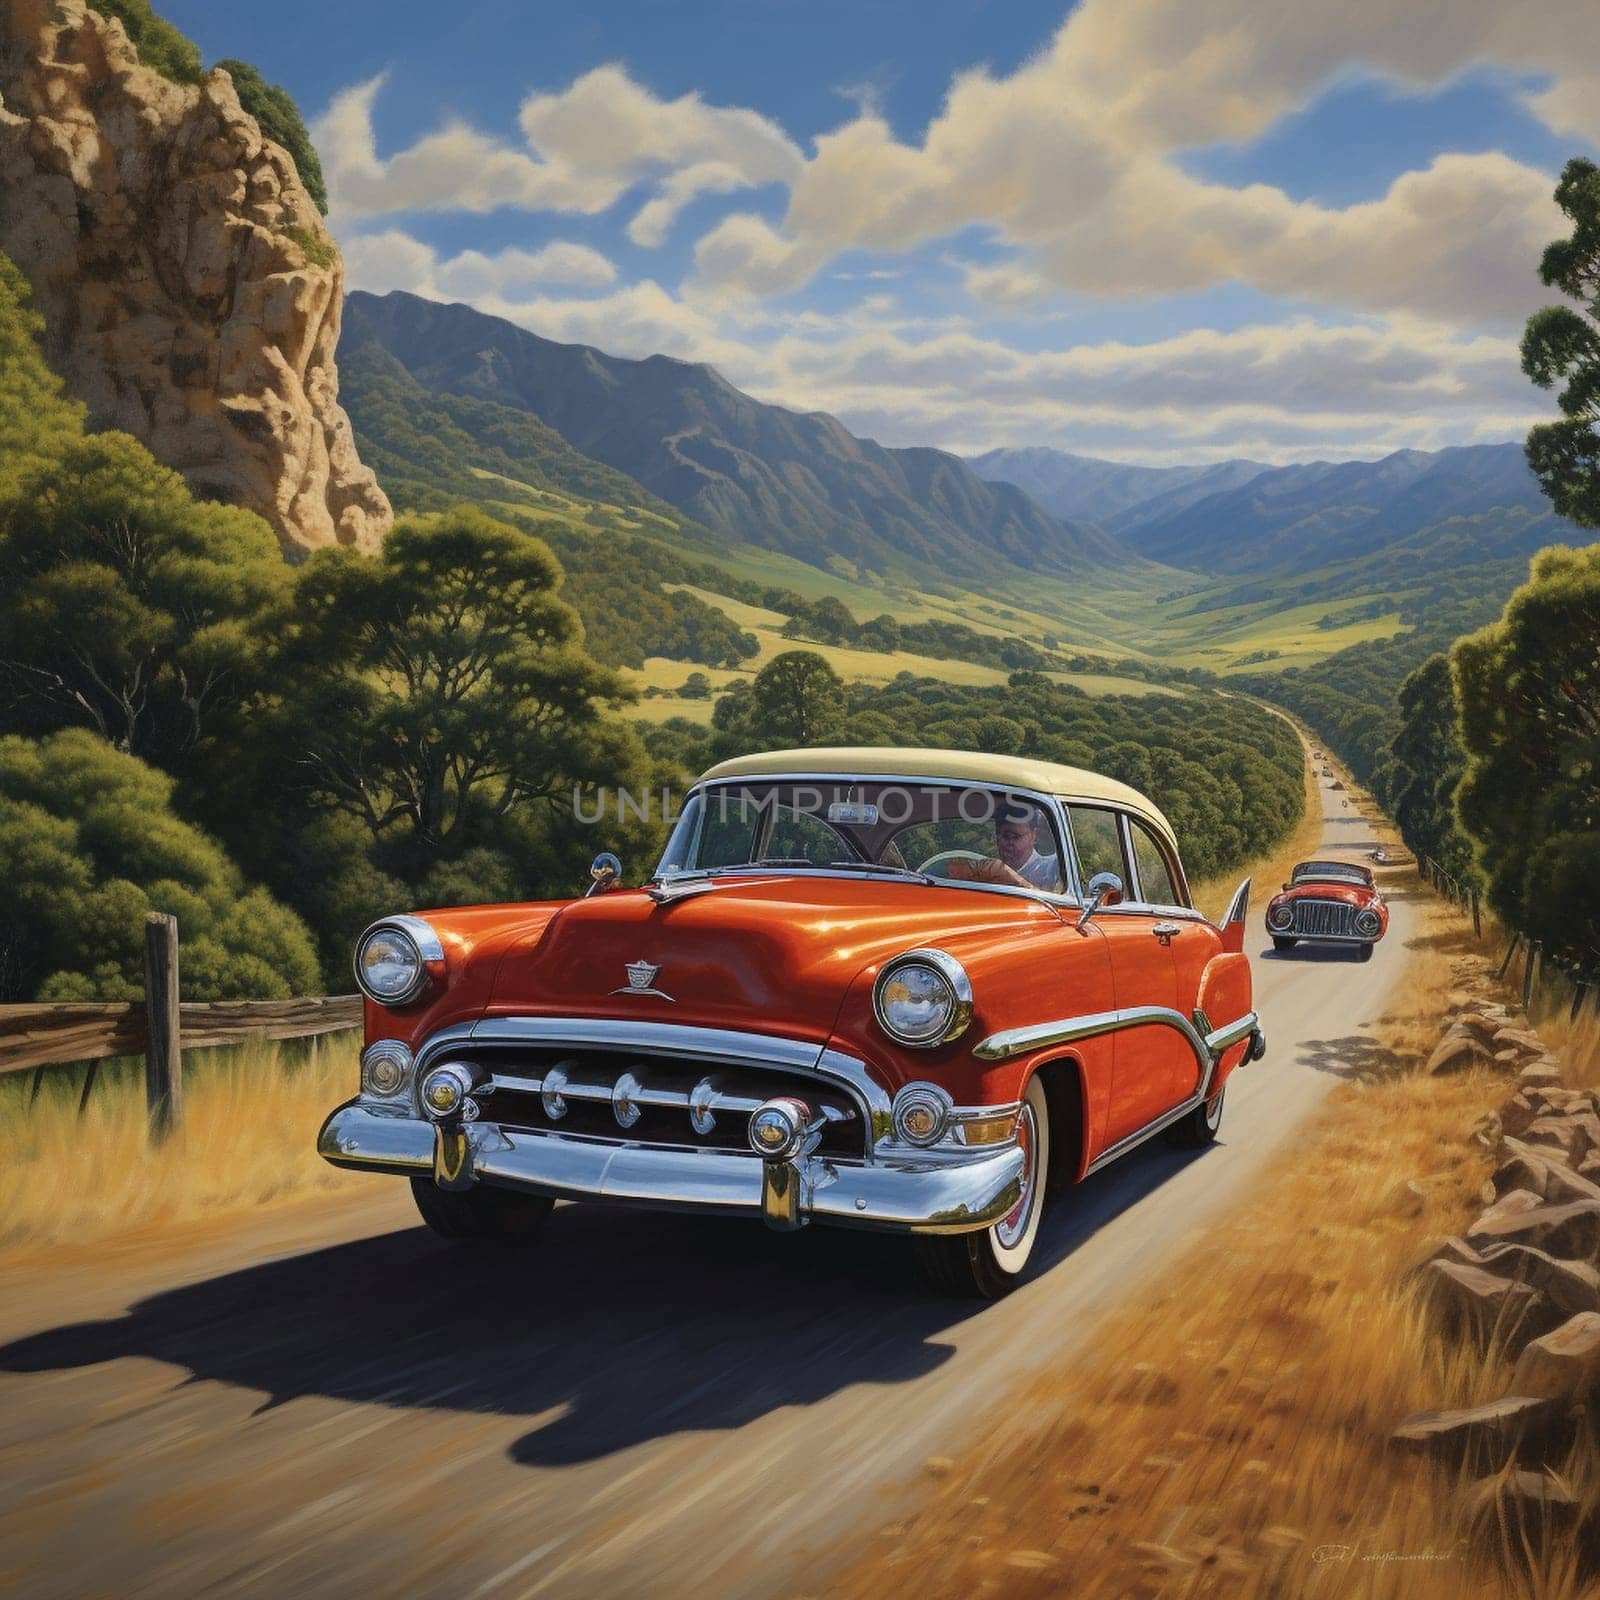 Vintage in Motion: A Classic Car's Journey by Sahin